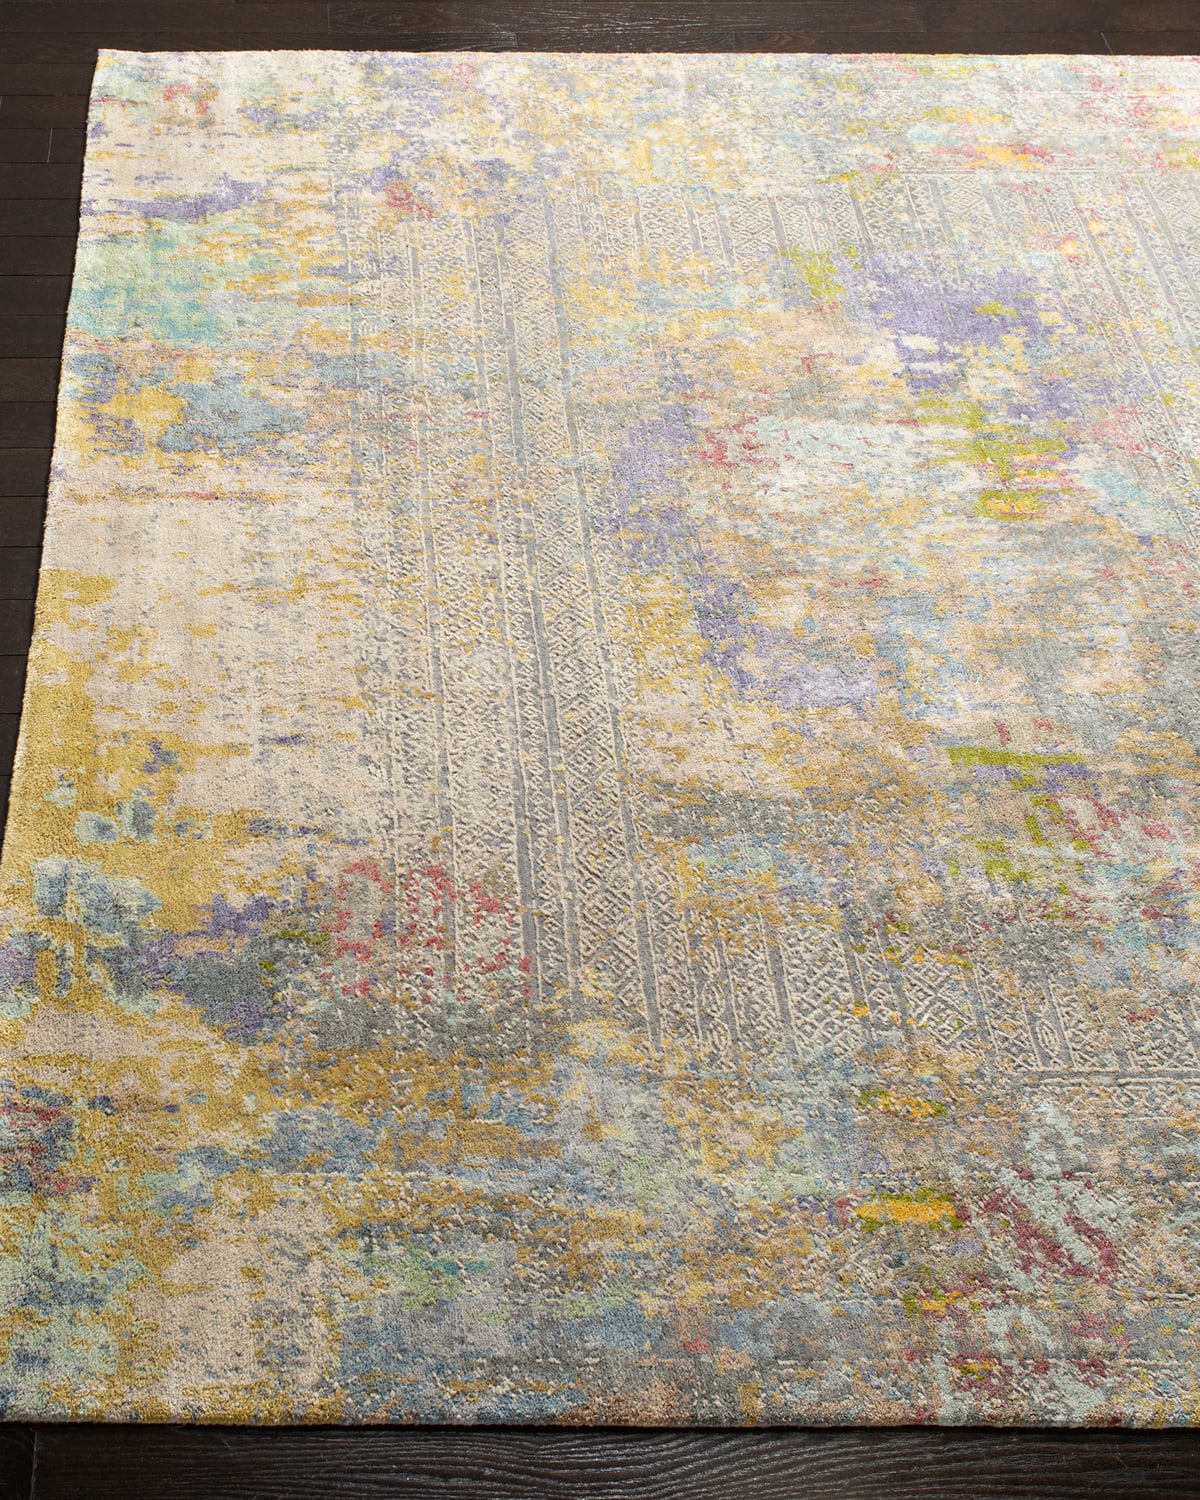 Weston Hand-Knotted Wool Rug, 6' x 9'